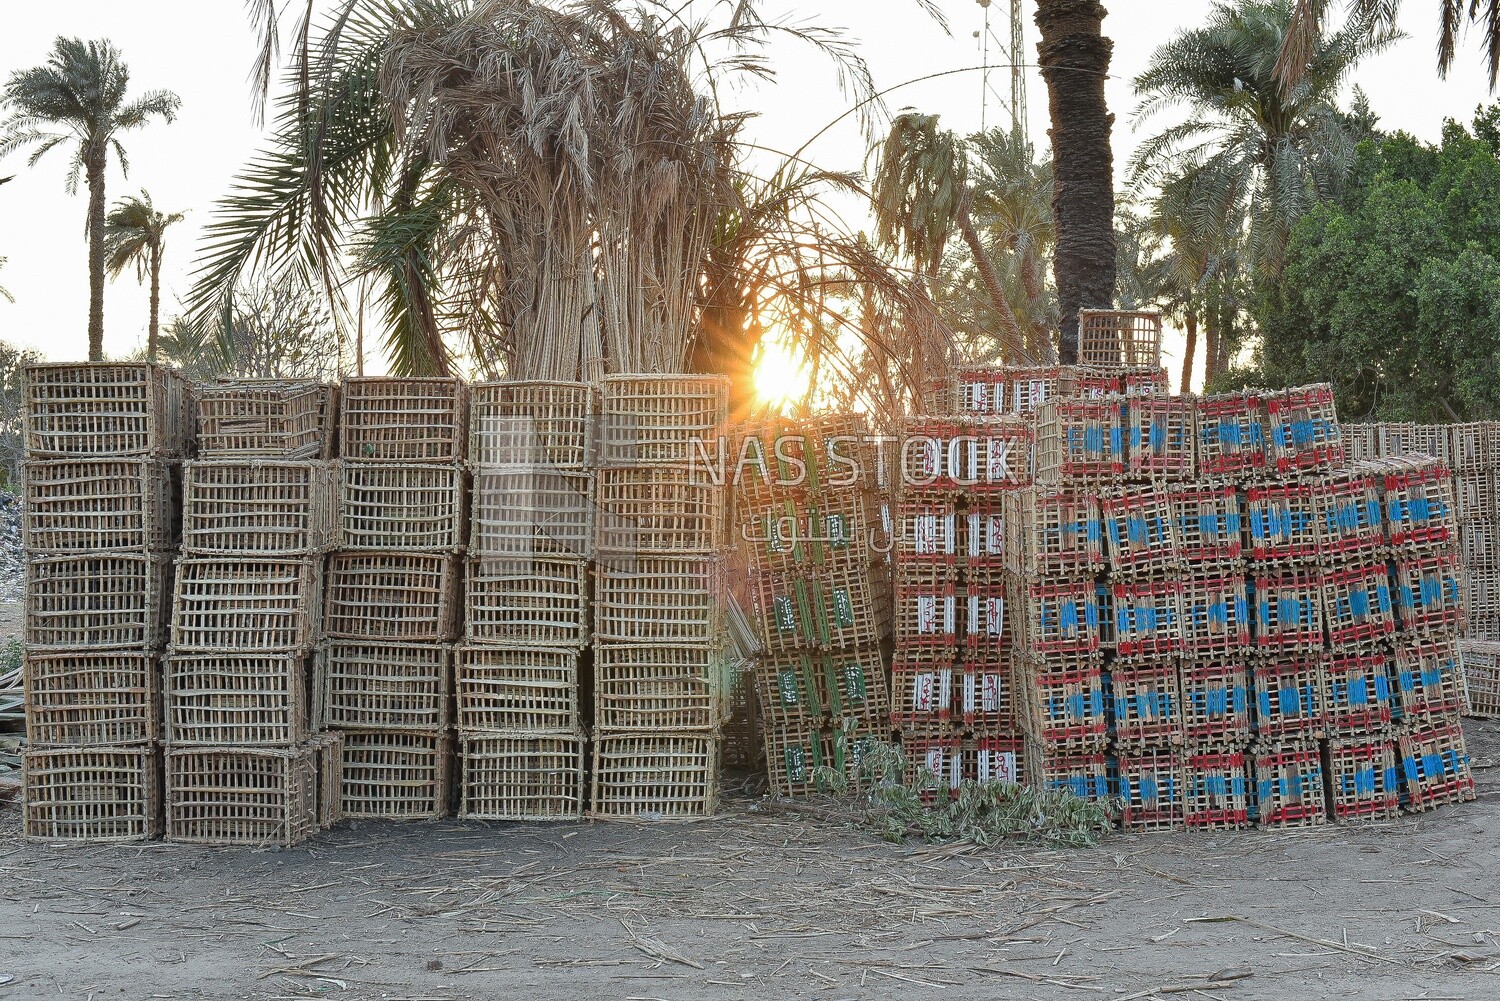 Group of stacked cages made of wicker